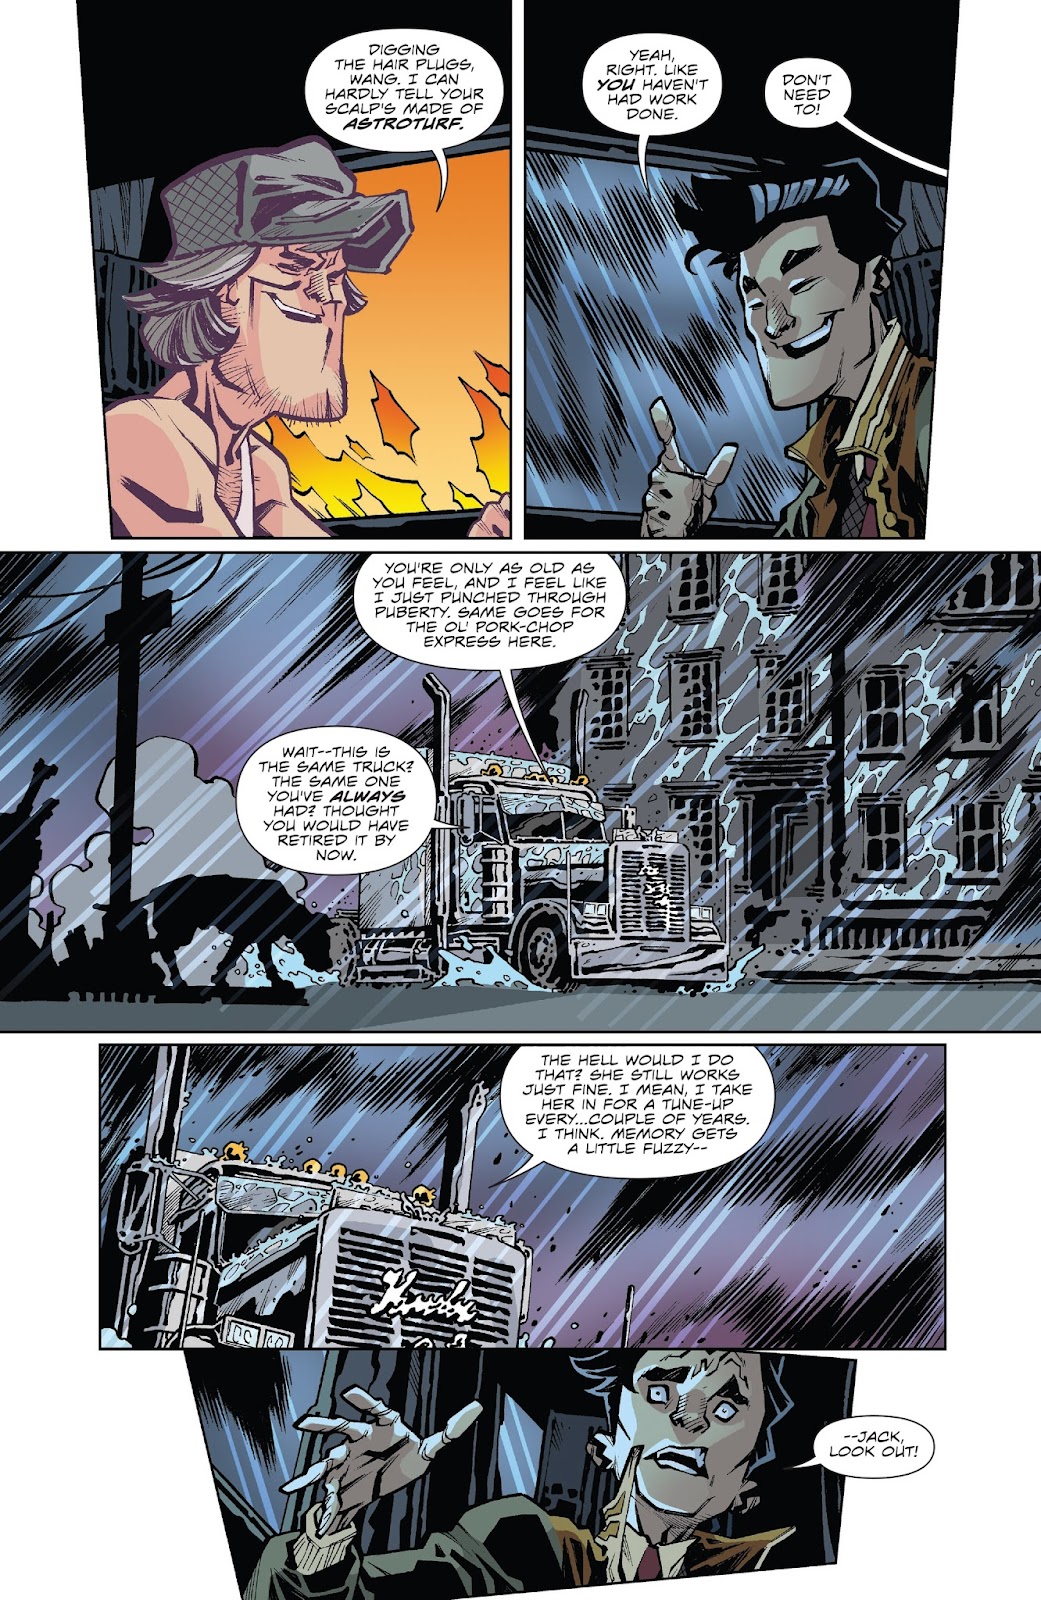 Big Trouble in Little China: Old Man Jack issue 3 - Page 9